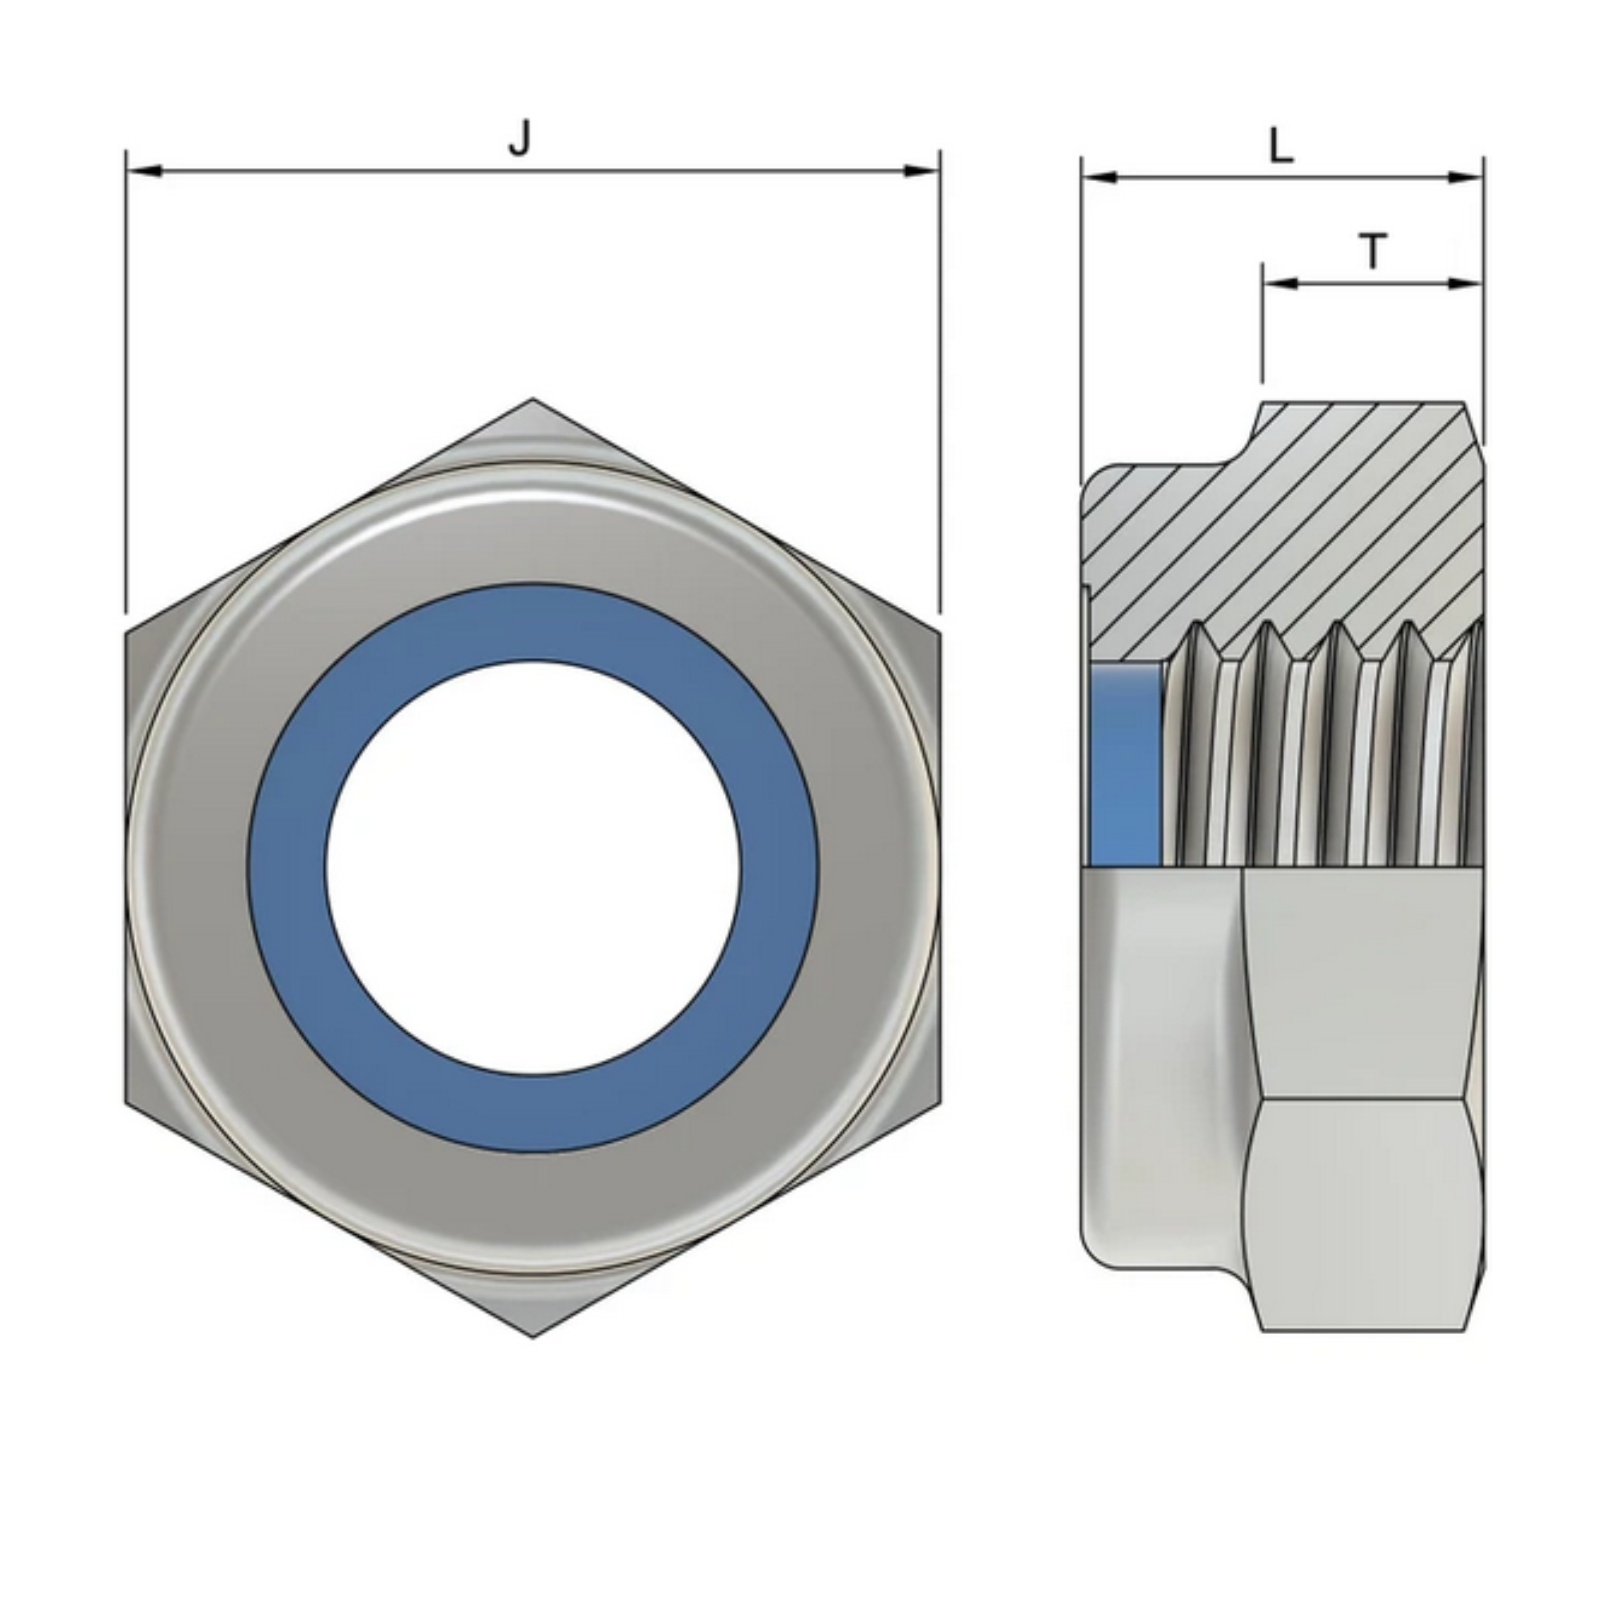 M2.5 Hexagon Nylon Locking Nuts (DIN 985) - Stainless Steel (A2)